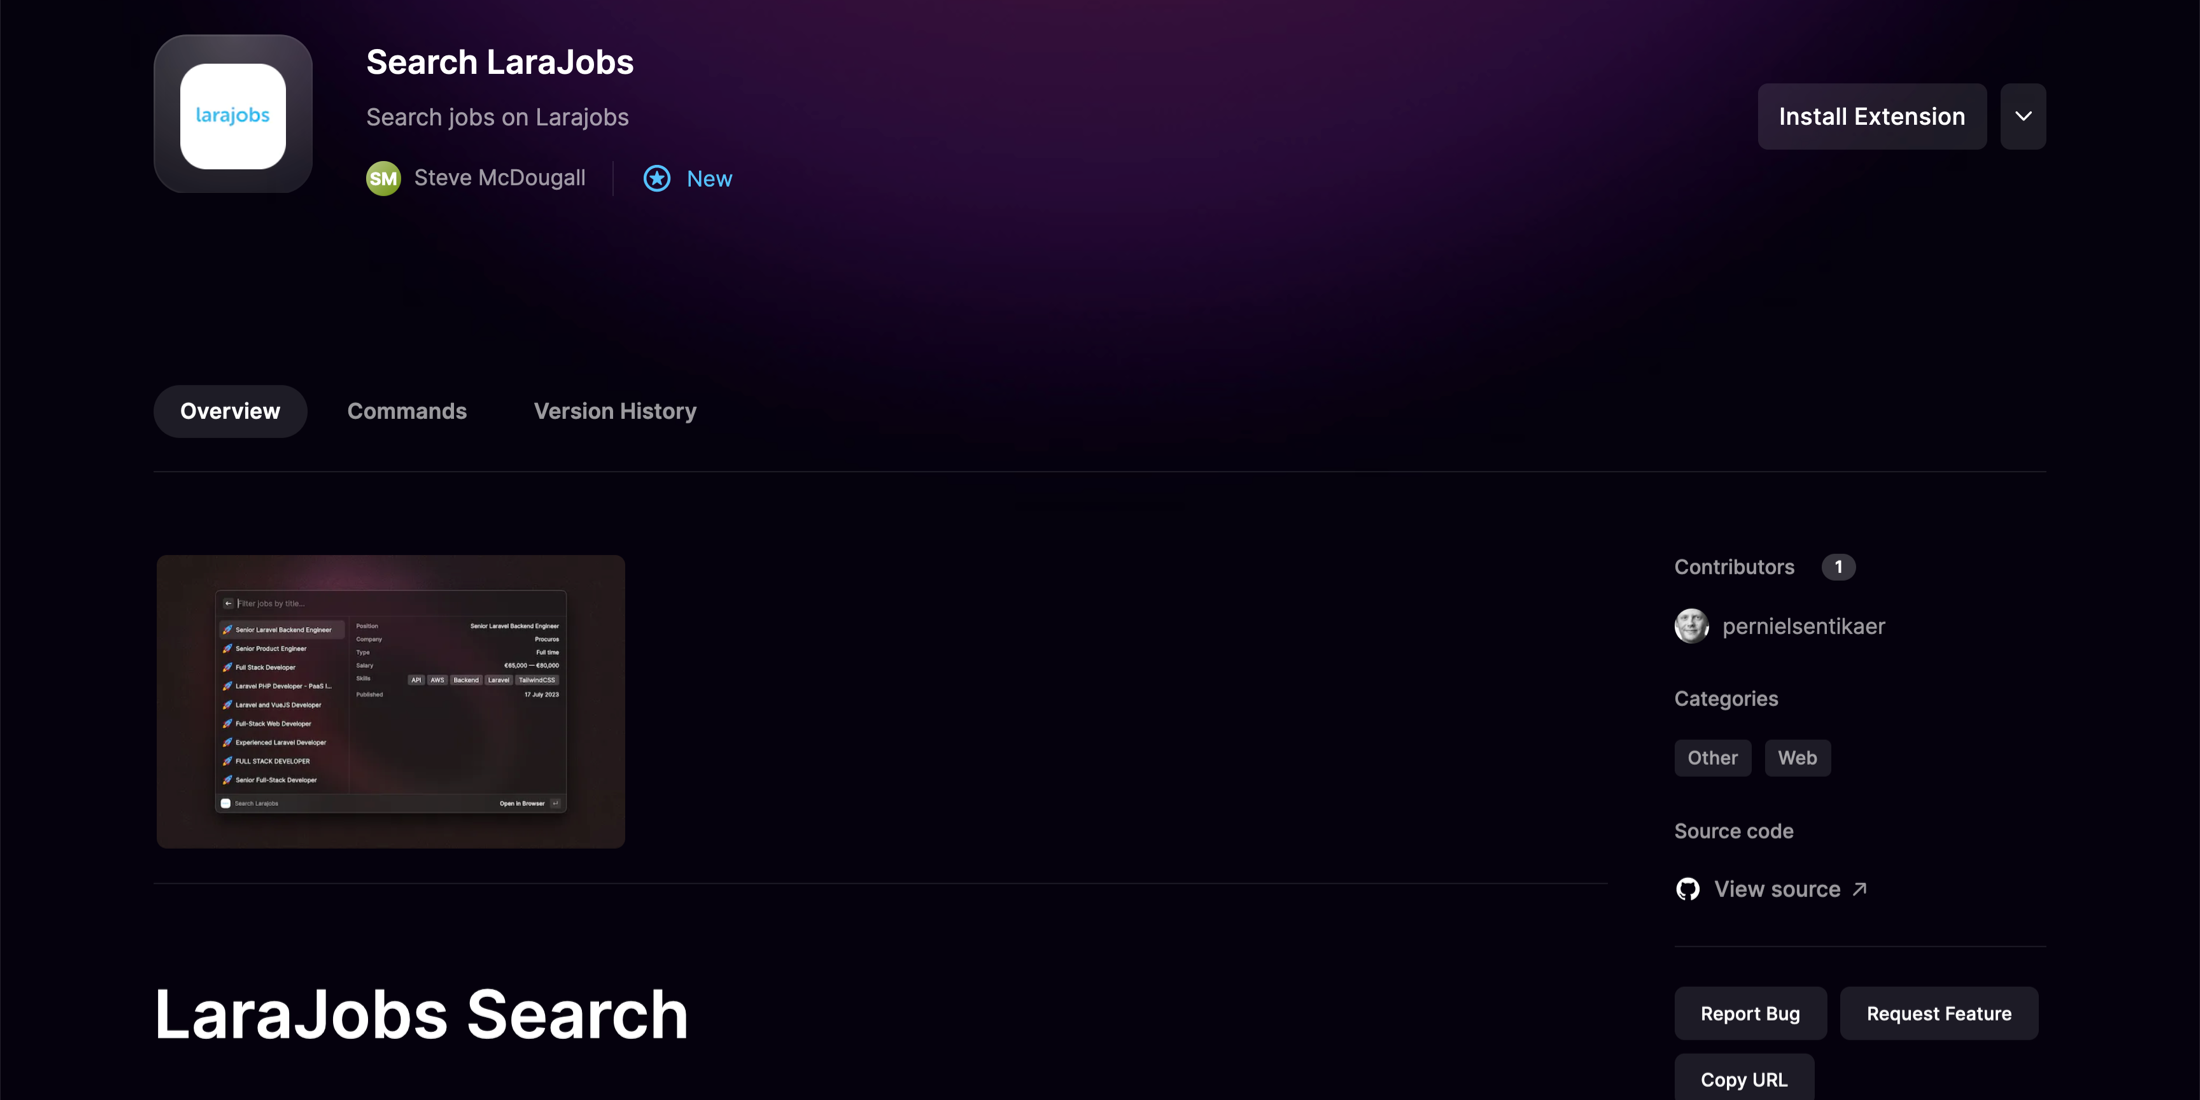 Search for Jobs on LaraJobs from Raycast image